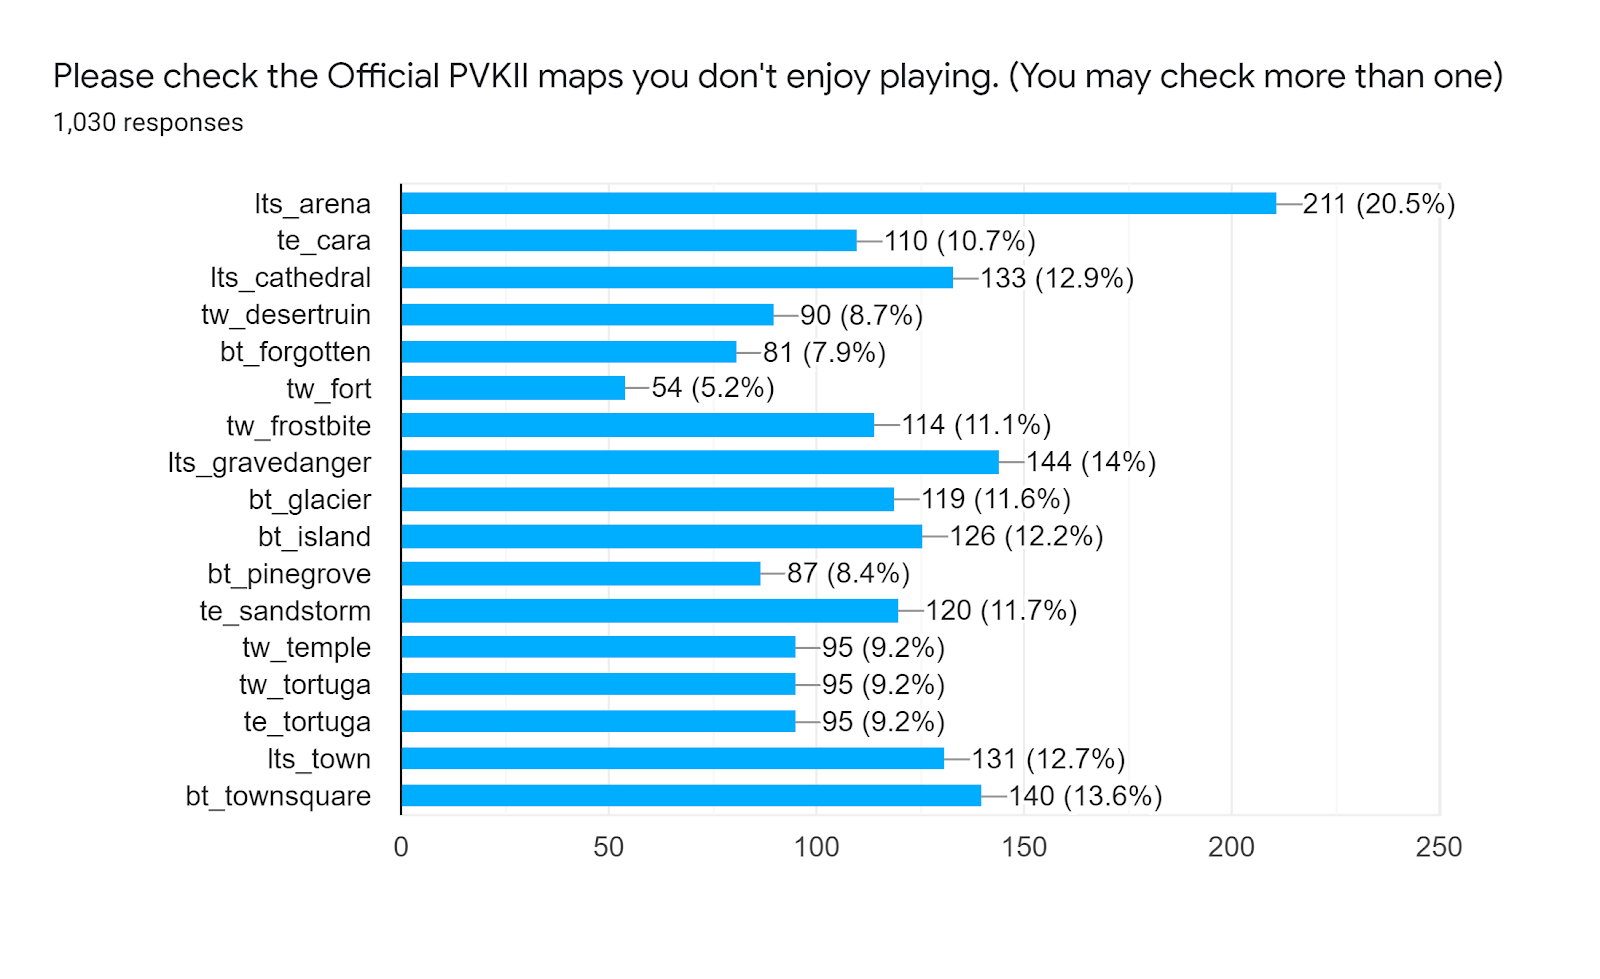 Forms response chart Question title Please check the Official PVKII maps you dont enjoy playing You may check more than one Number of responses 1030 responses